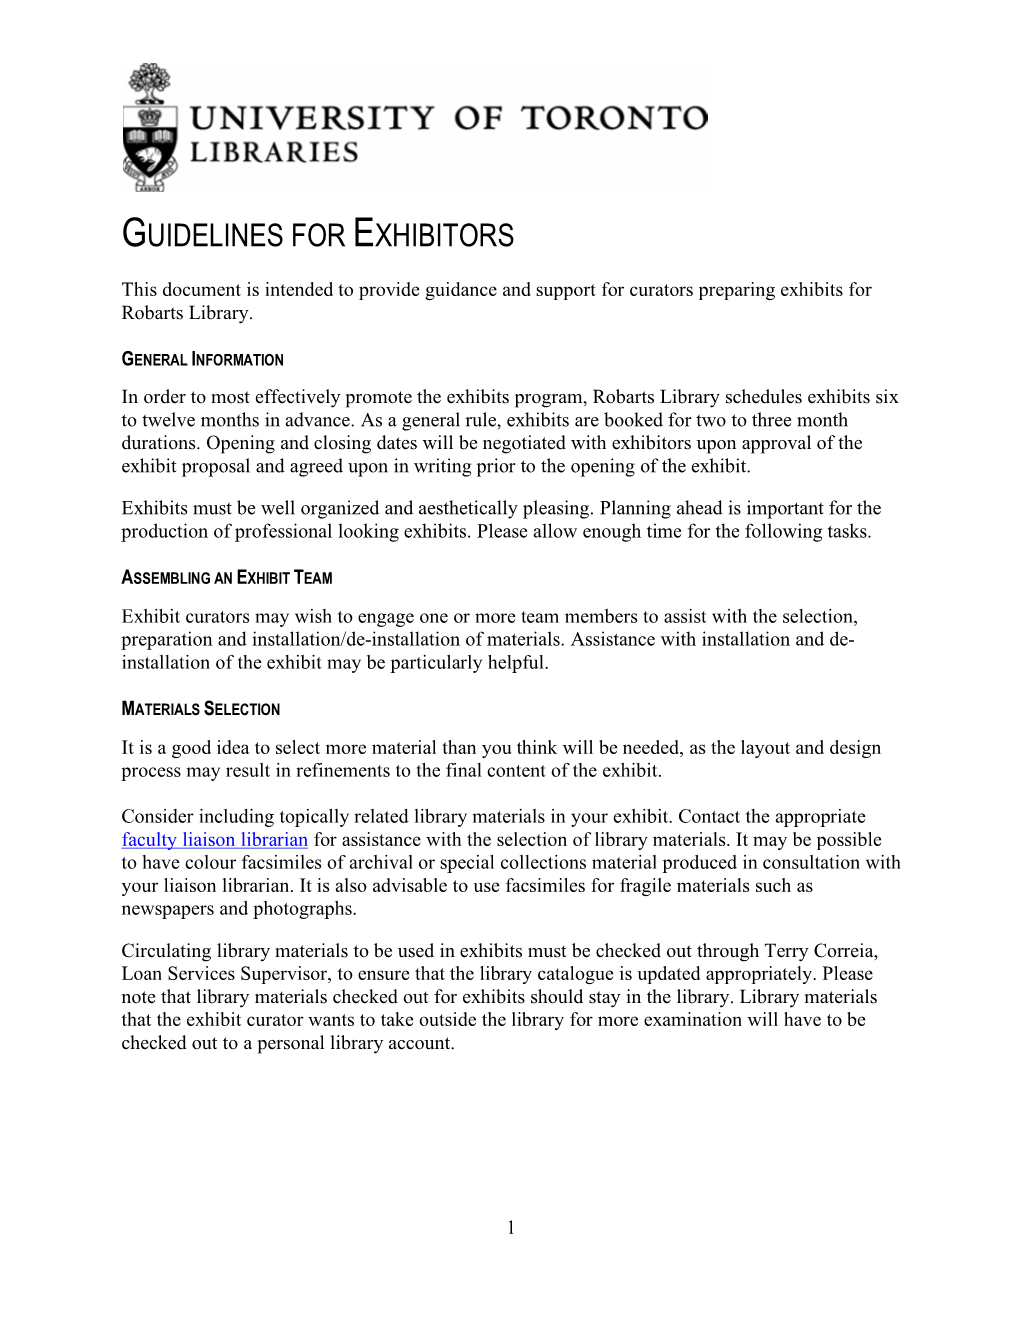 Guidelines for Exhibitors